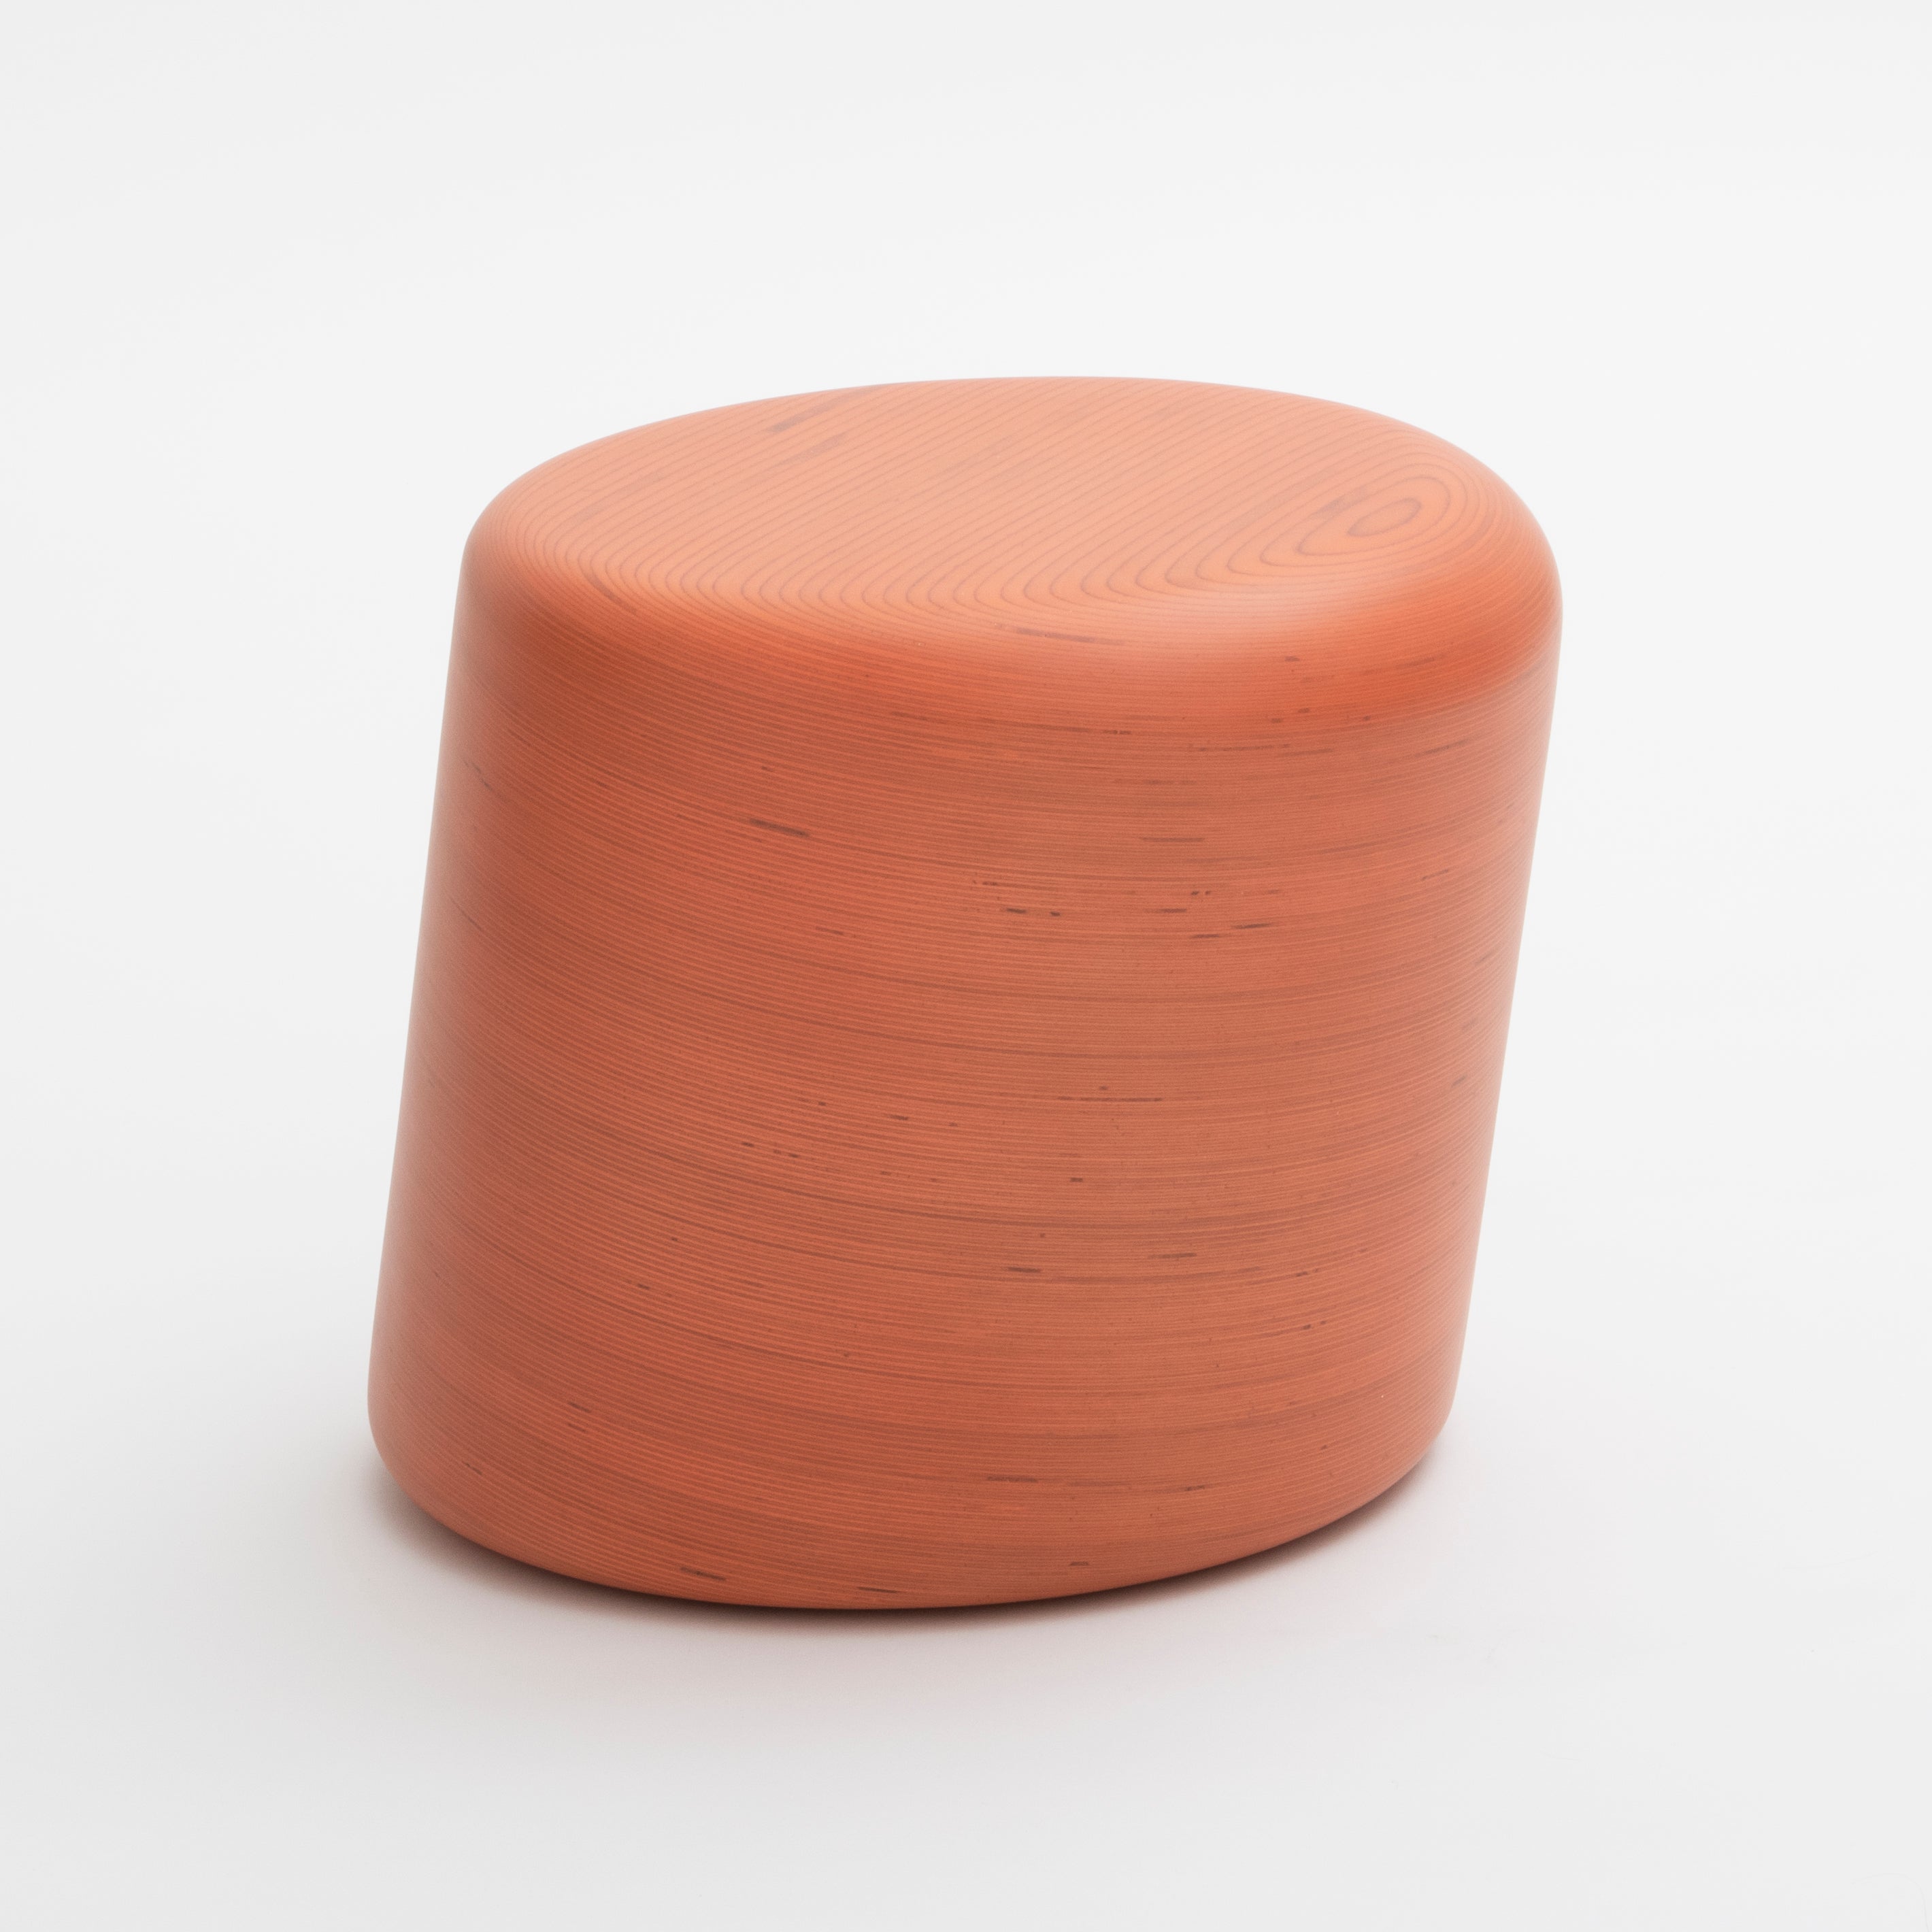 Handcrafted stool by furniture design studio Timbur . Available through fine art and design gallery Tuleste Factory in New York City. 